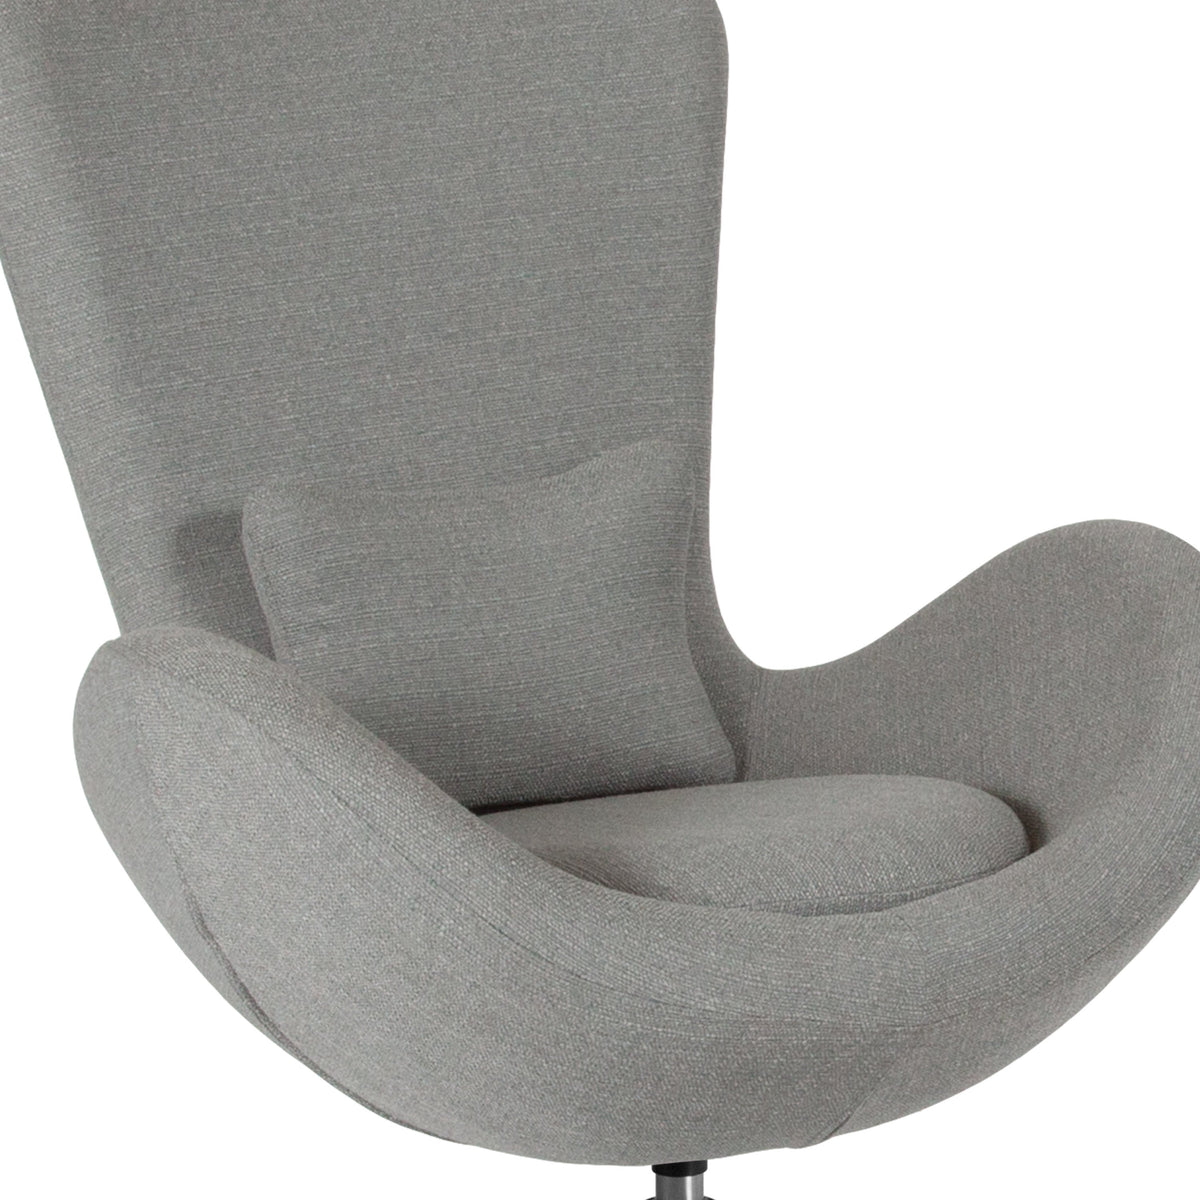 Light Gray Fabric |#| Light Gray Fabric Side Reception Chair with Bowed Seat - Guest Seating